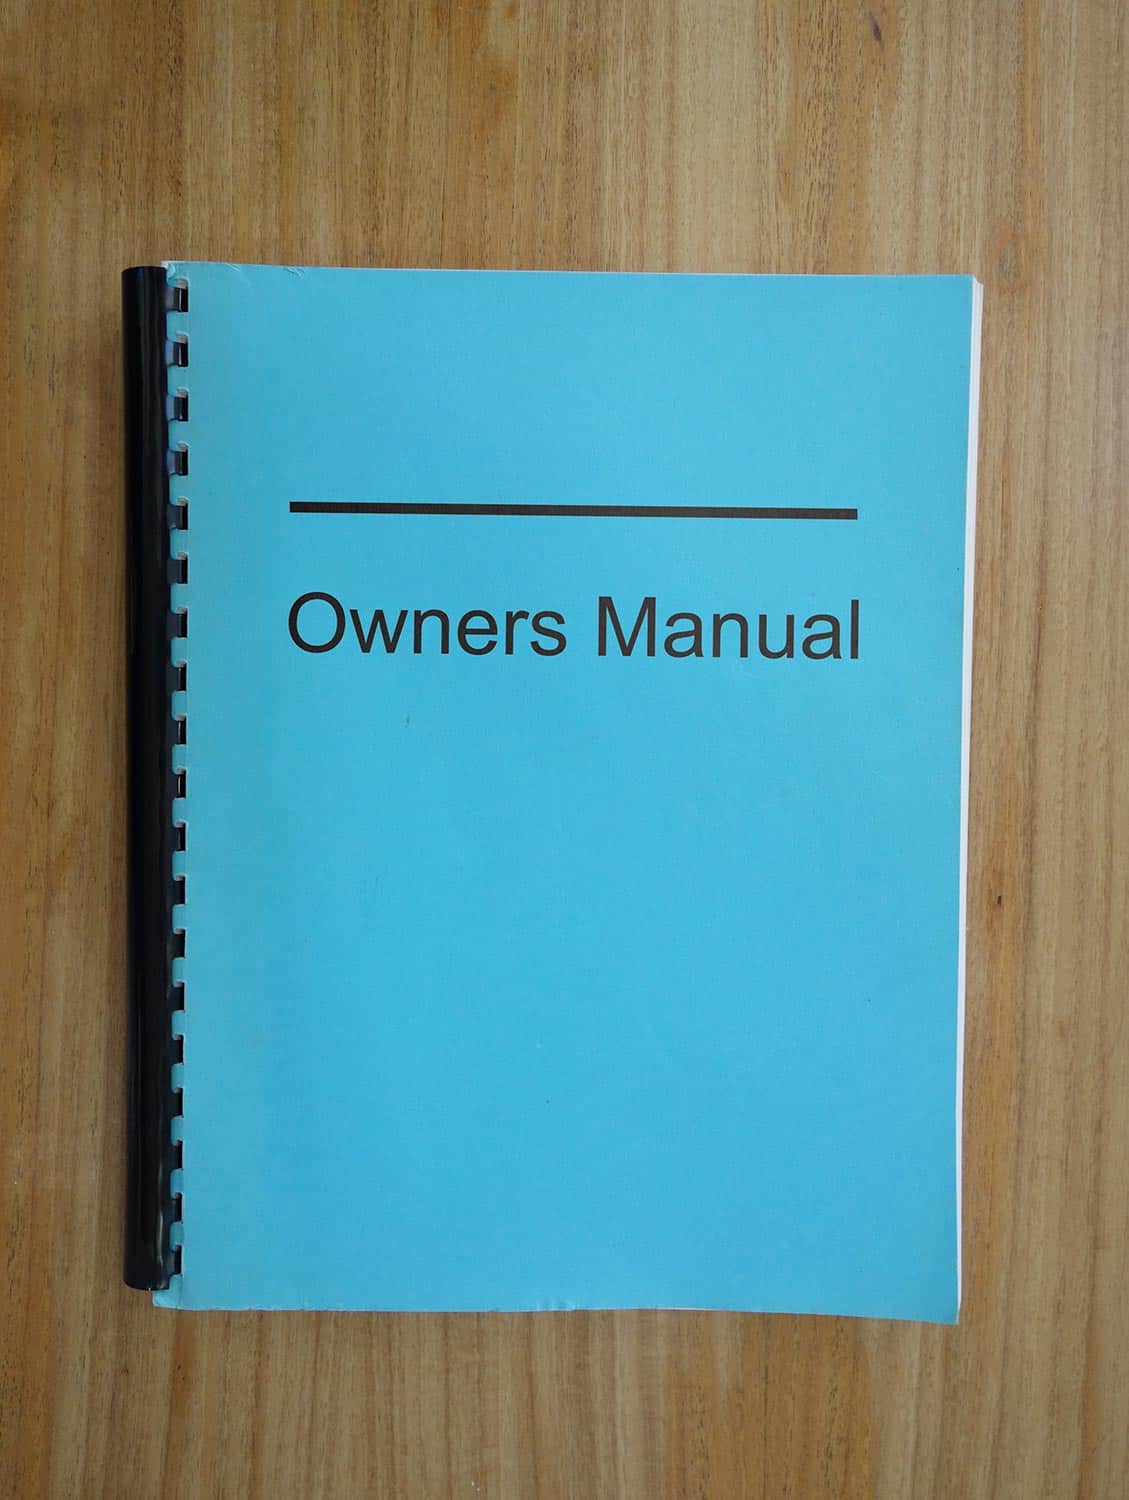 Owners manual binder on a desk